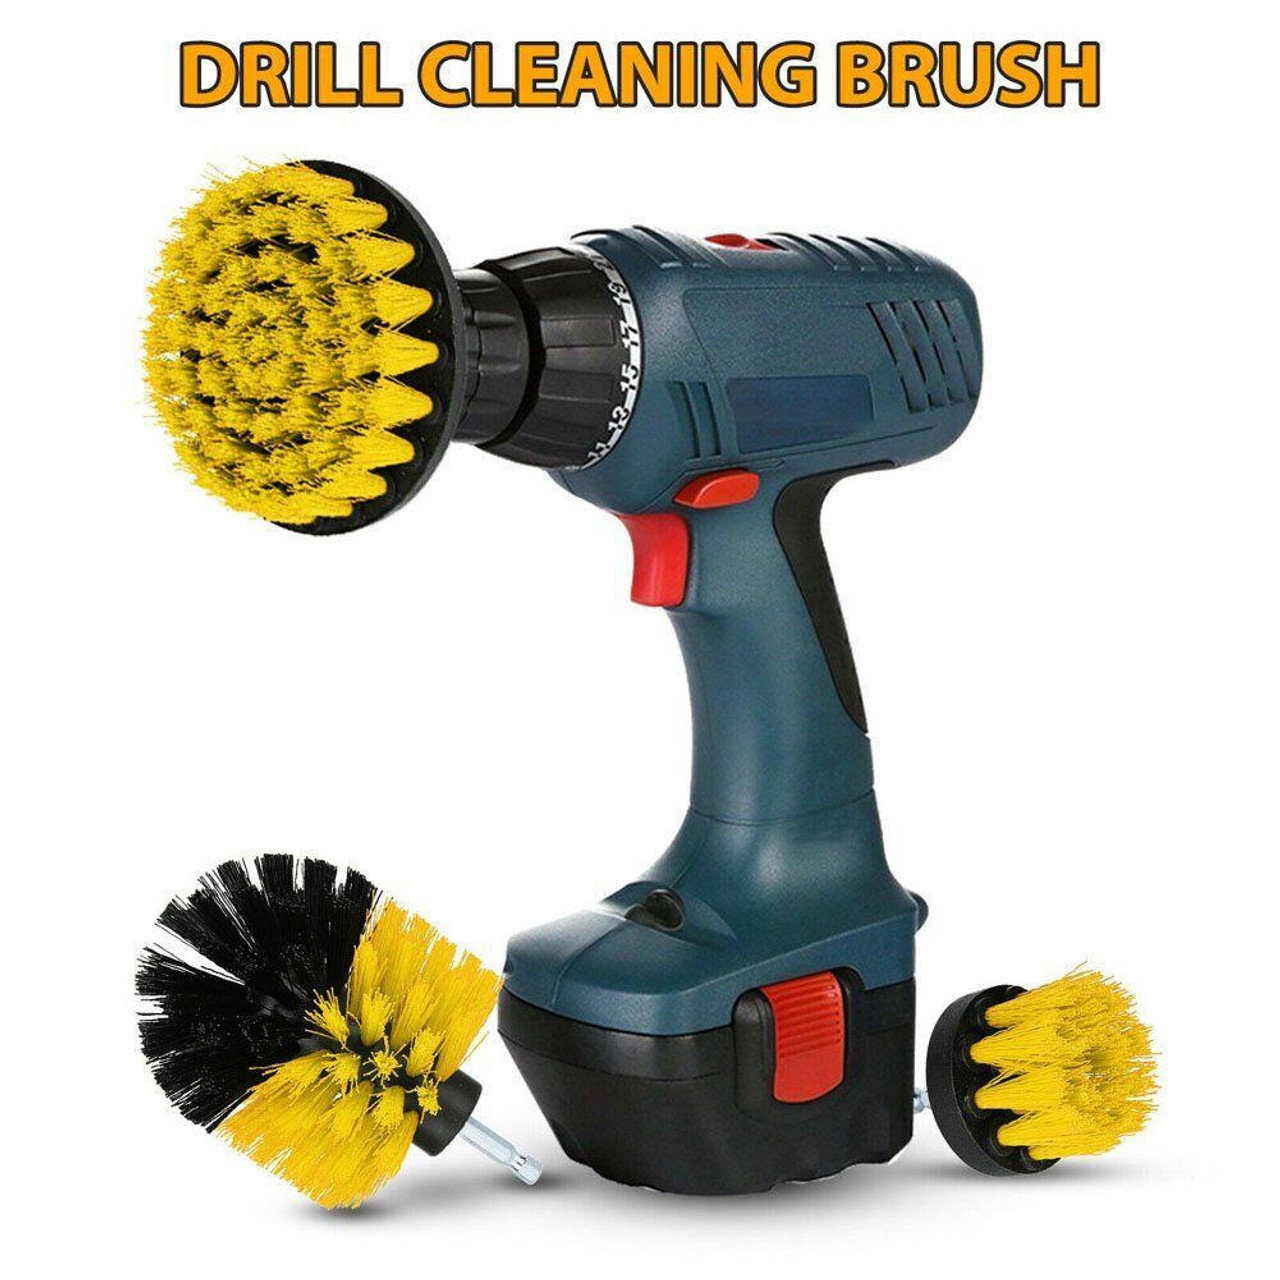 https://cdn11.bigcommerce.com/s-zrh8tkpr8d/images/stencil/1280x1280/products/10076/30814/1221-pcs-electric-drill-brush-attachment-set-cleaning-kit-power-scrubber-pads__03734.1675296151.jpg?c=2&imbypass=on